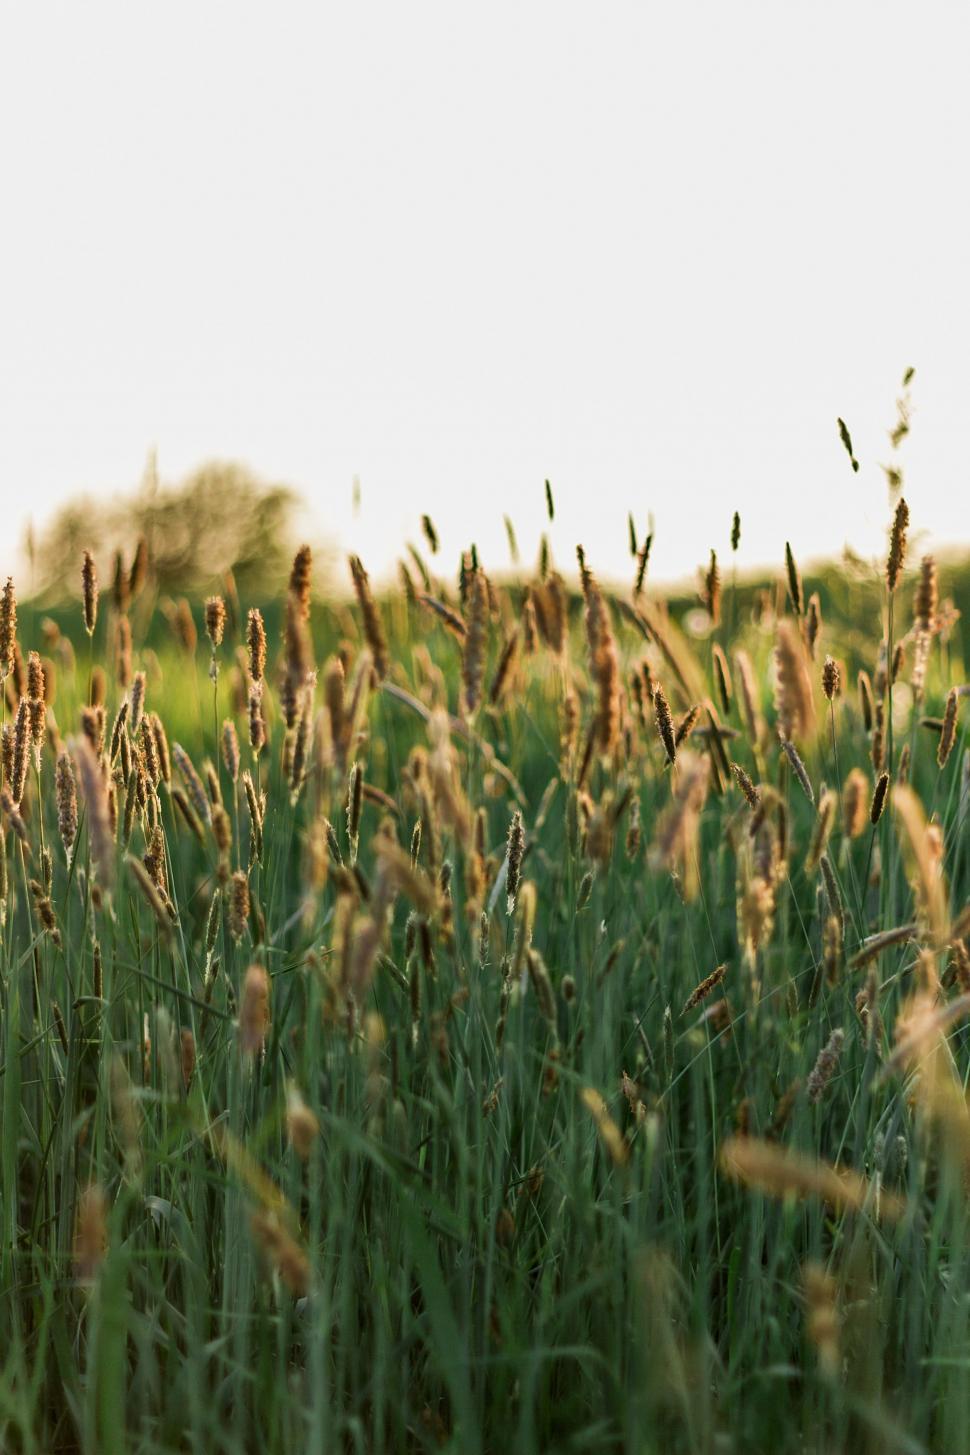 Free Image of Field of Tall Grass With Trees in the Background 